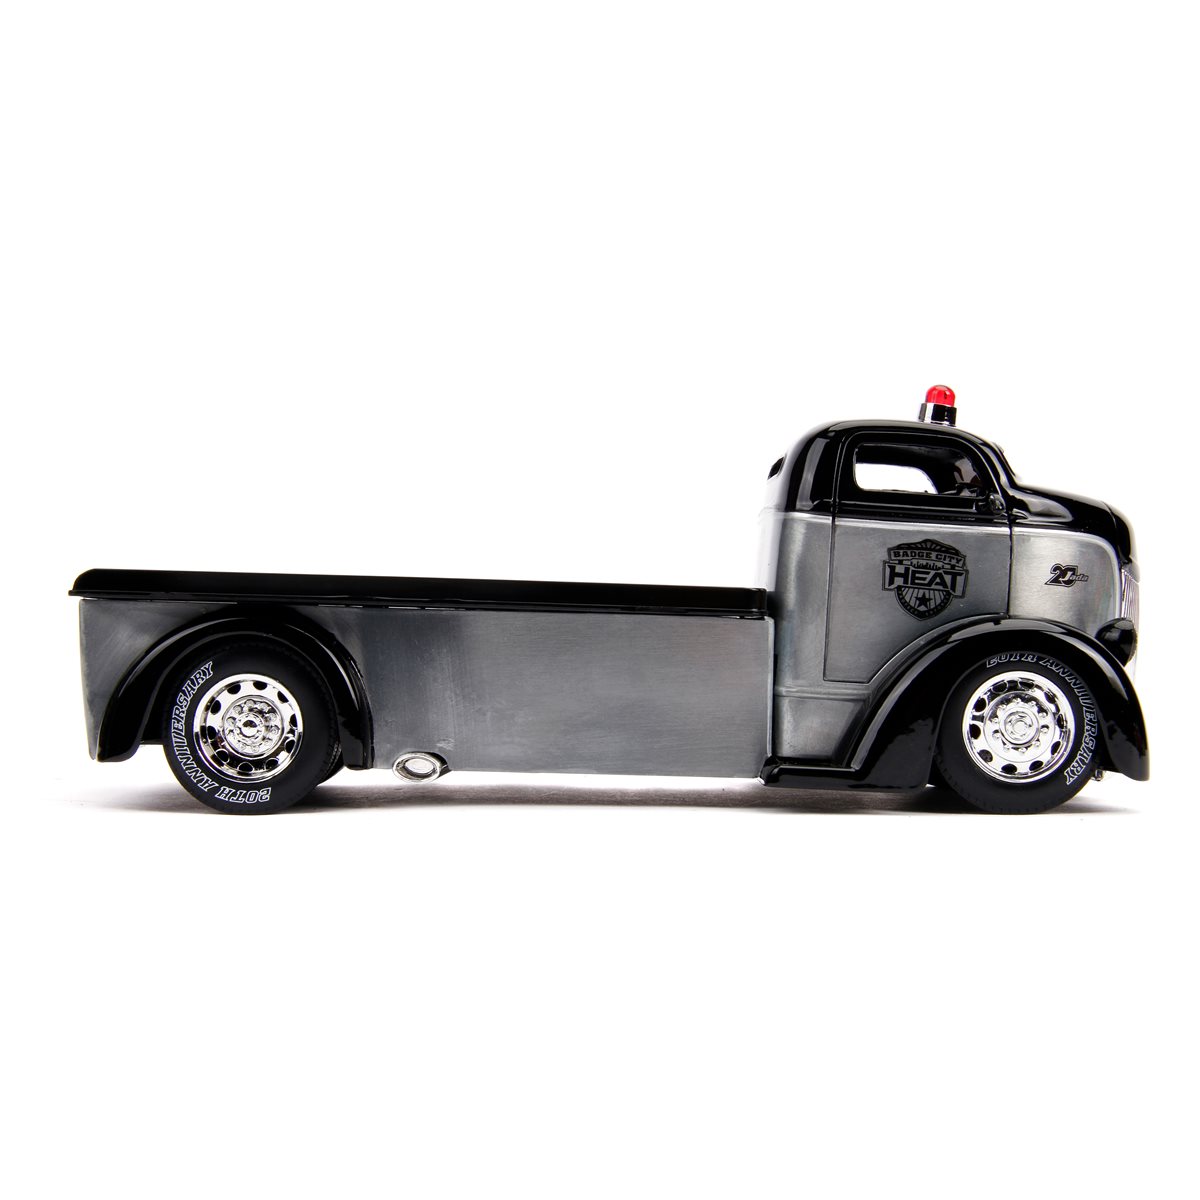 JADA 1947 FORD COE FLATBED TOW TRUCK W/EXTRA WHEELS GRAY 1/24 DIECAST 31540